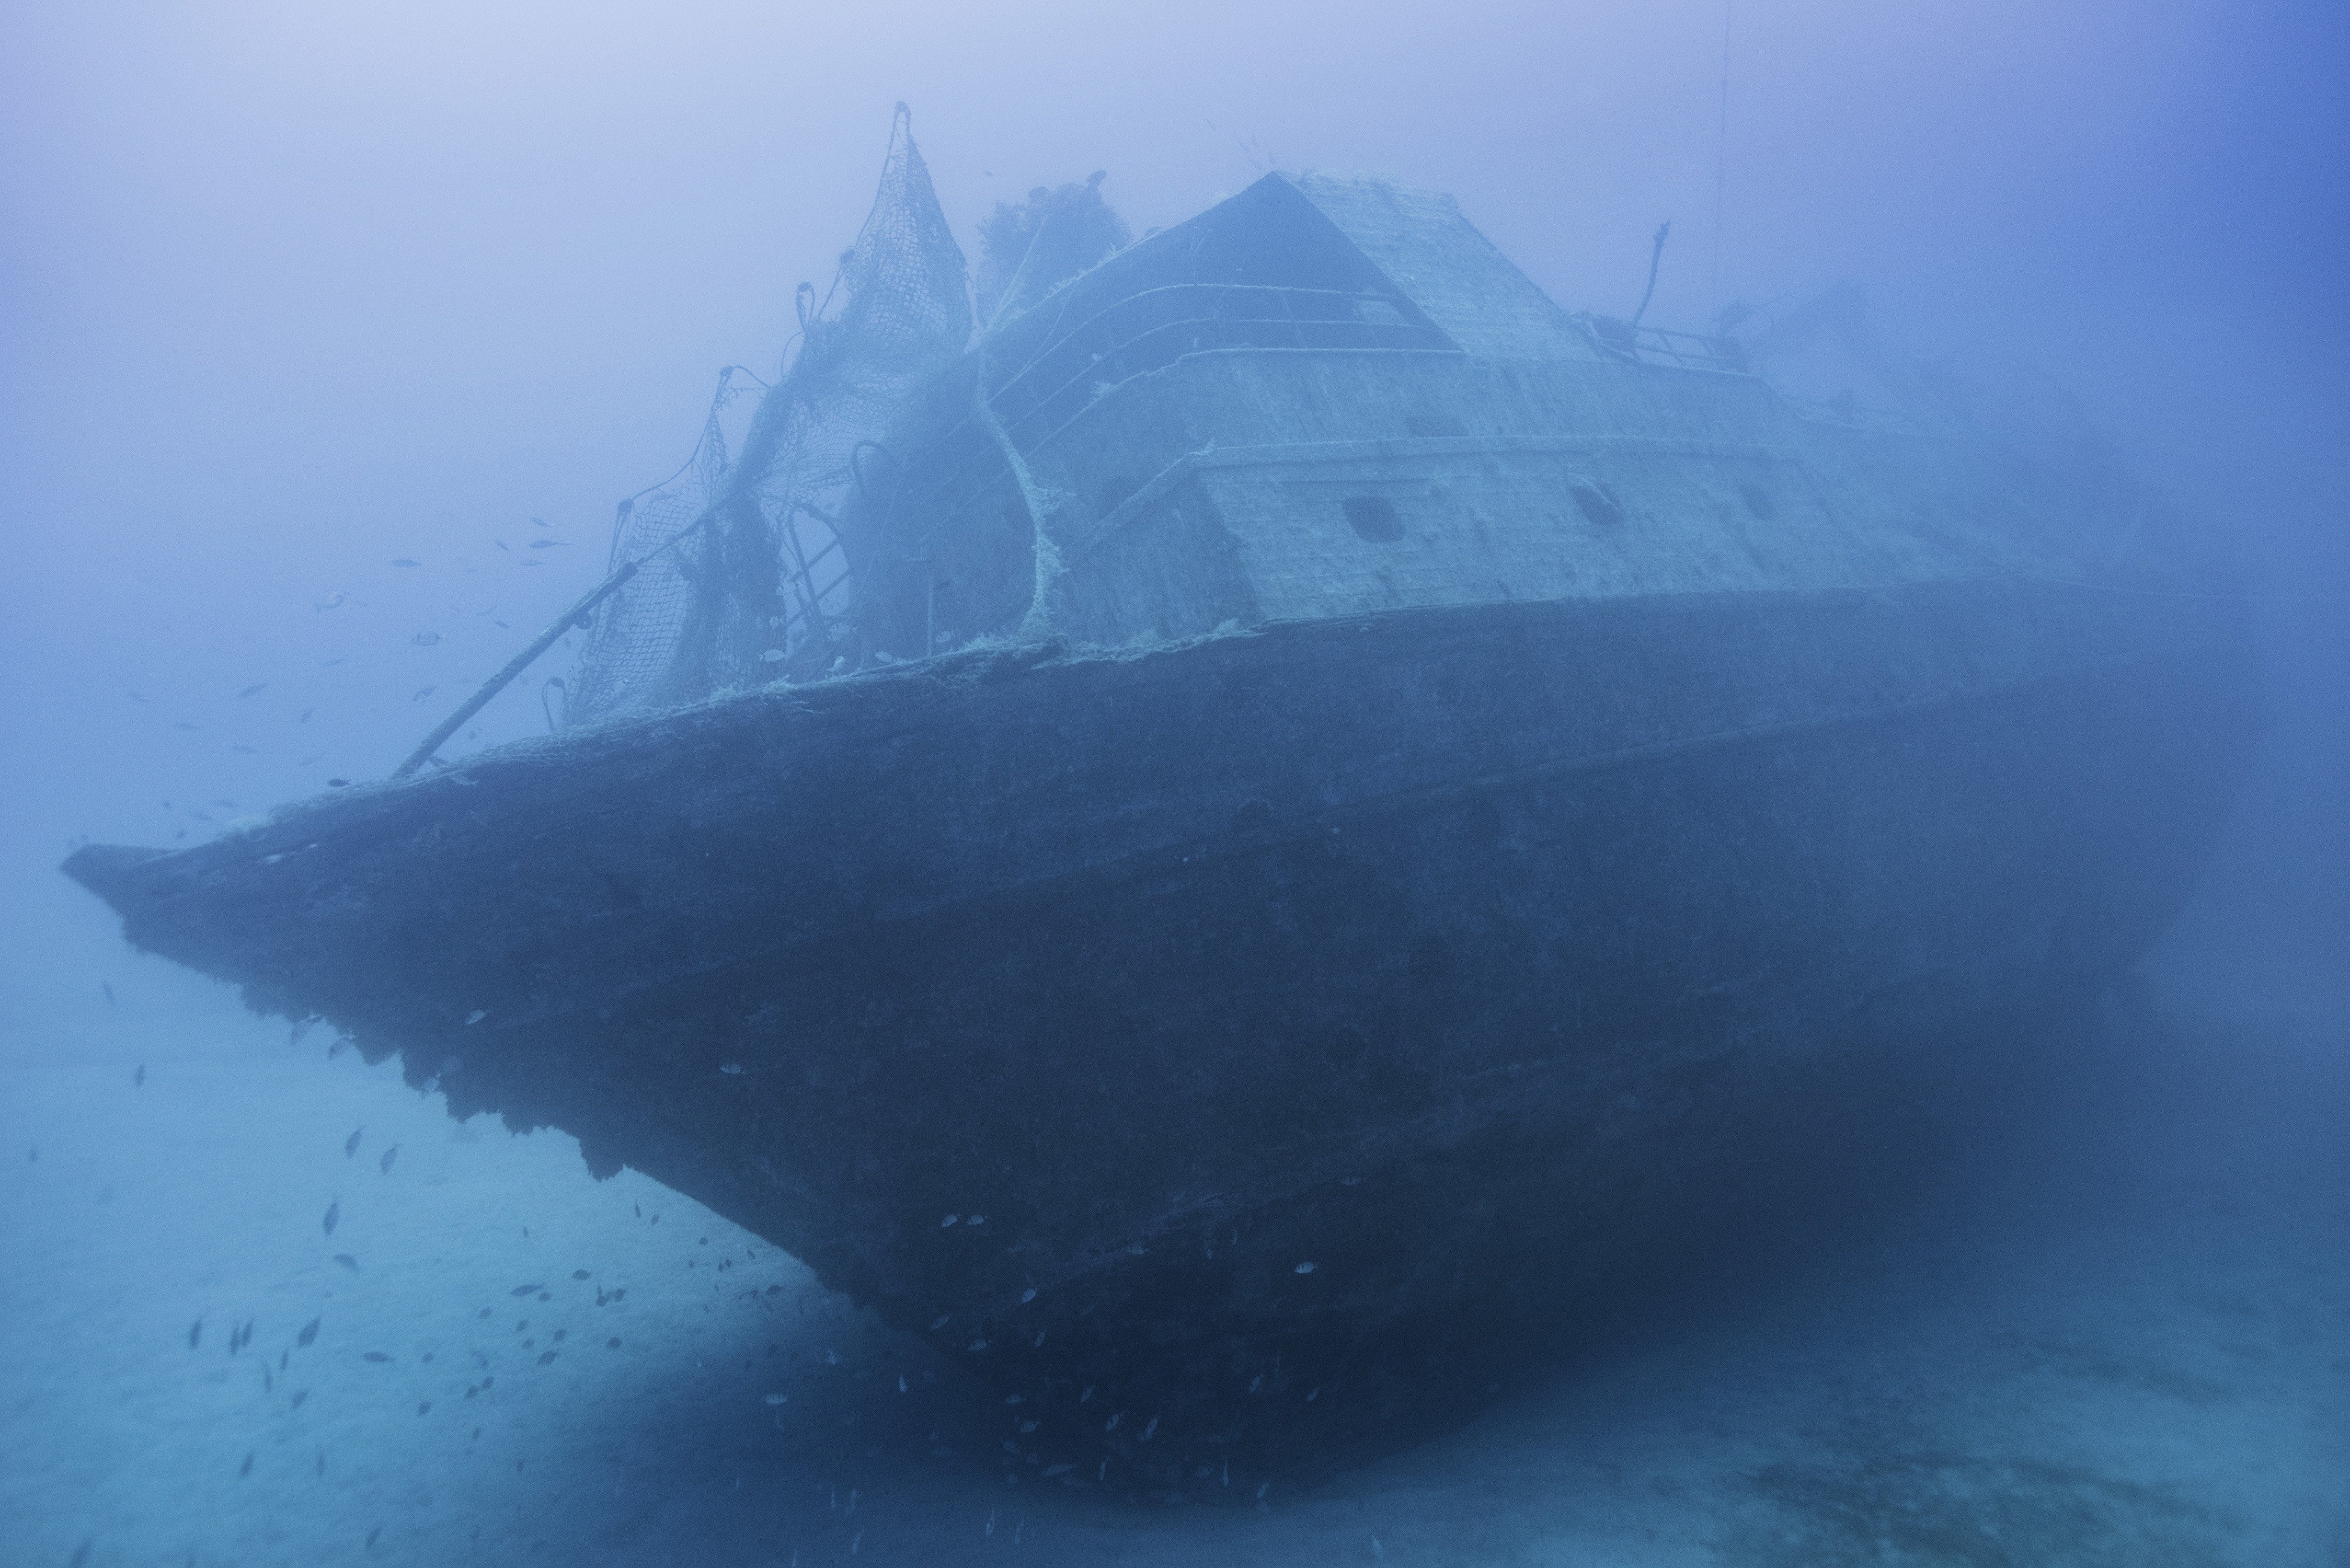 Lampedusa Shipwreck: From the Depths of the Mediterranean Sea | Time.com